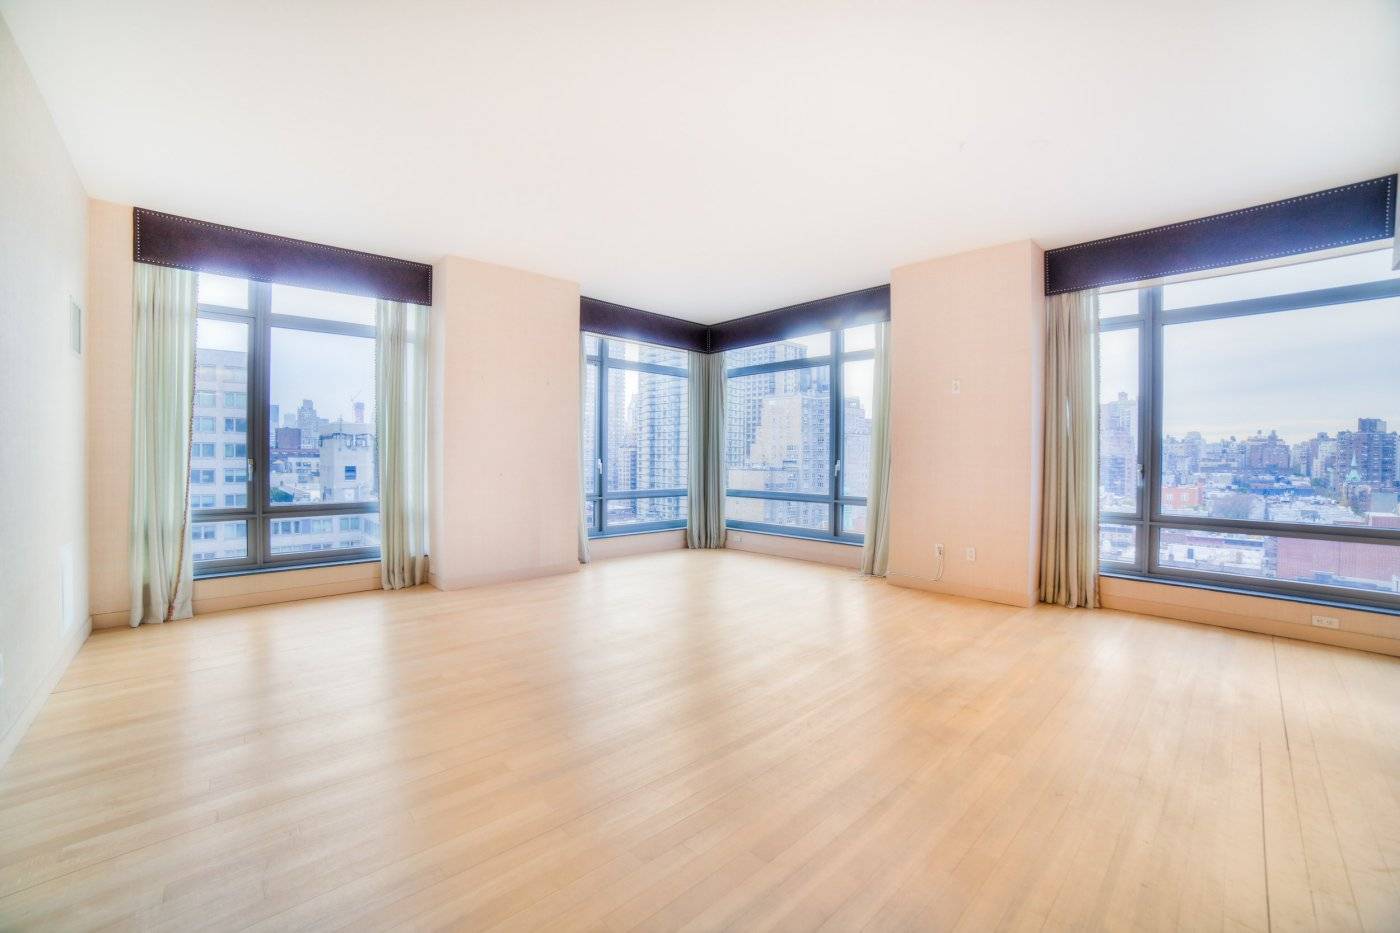 NO FEE! Flooded with Light - 11' Floor-to-Ceiling Windows in Loft-like Home